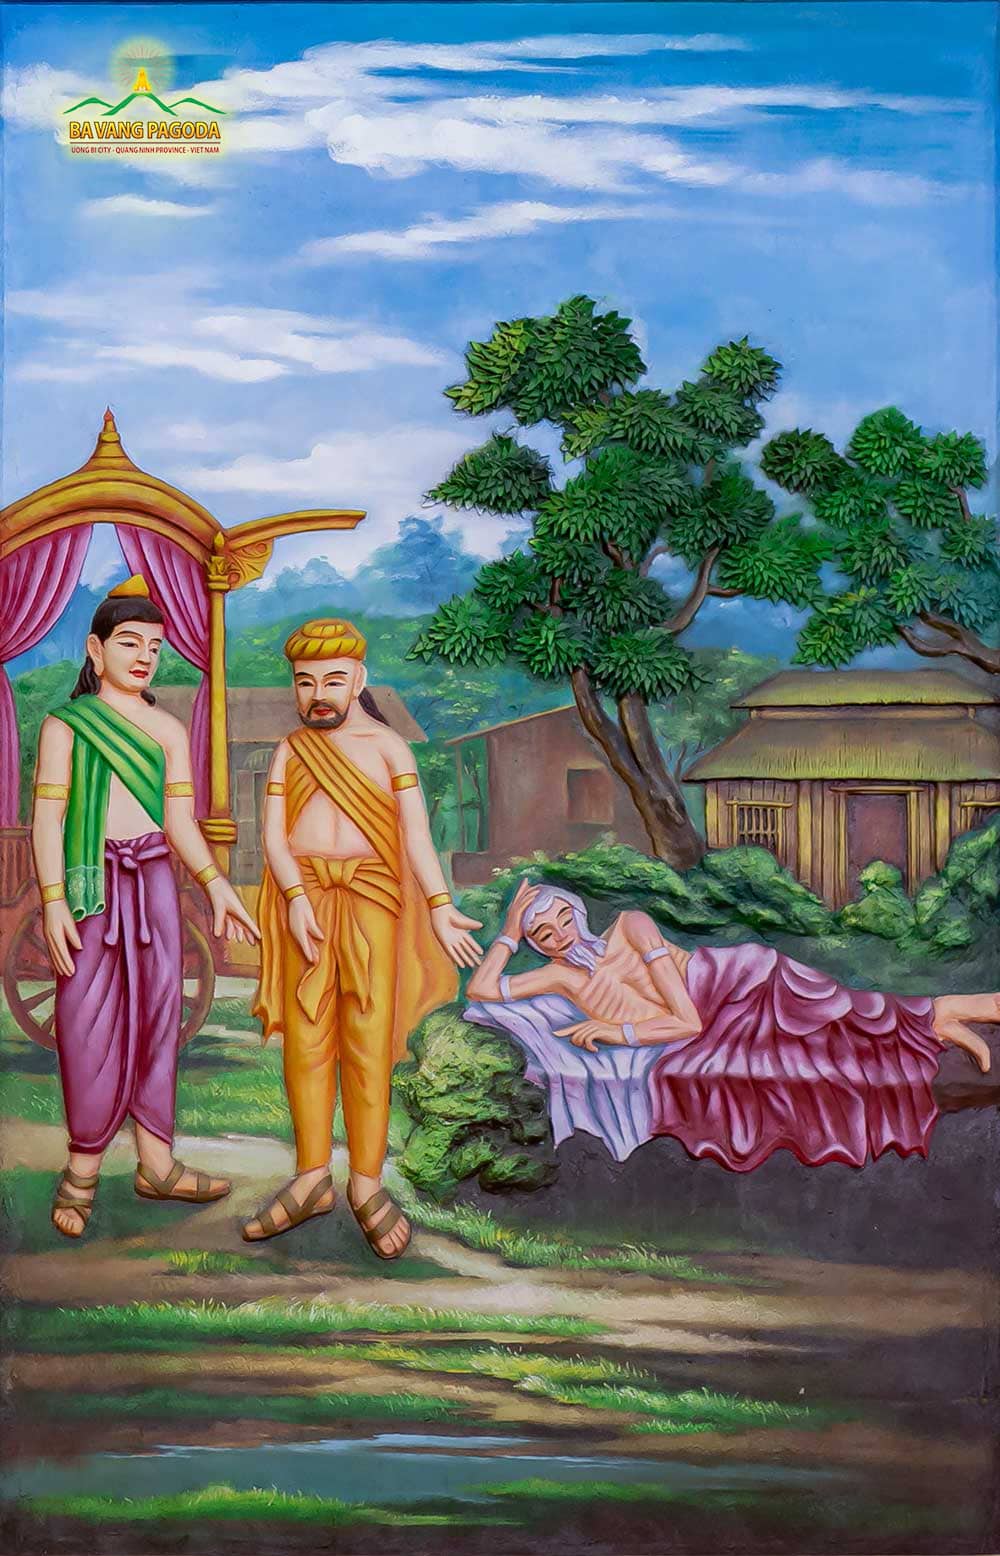 The second time Prince Siddhartha went out of the gate, he saw an ill man.